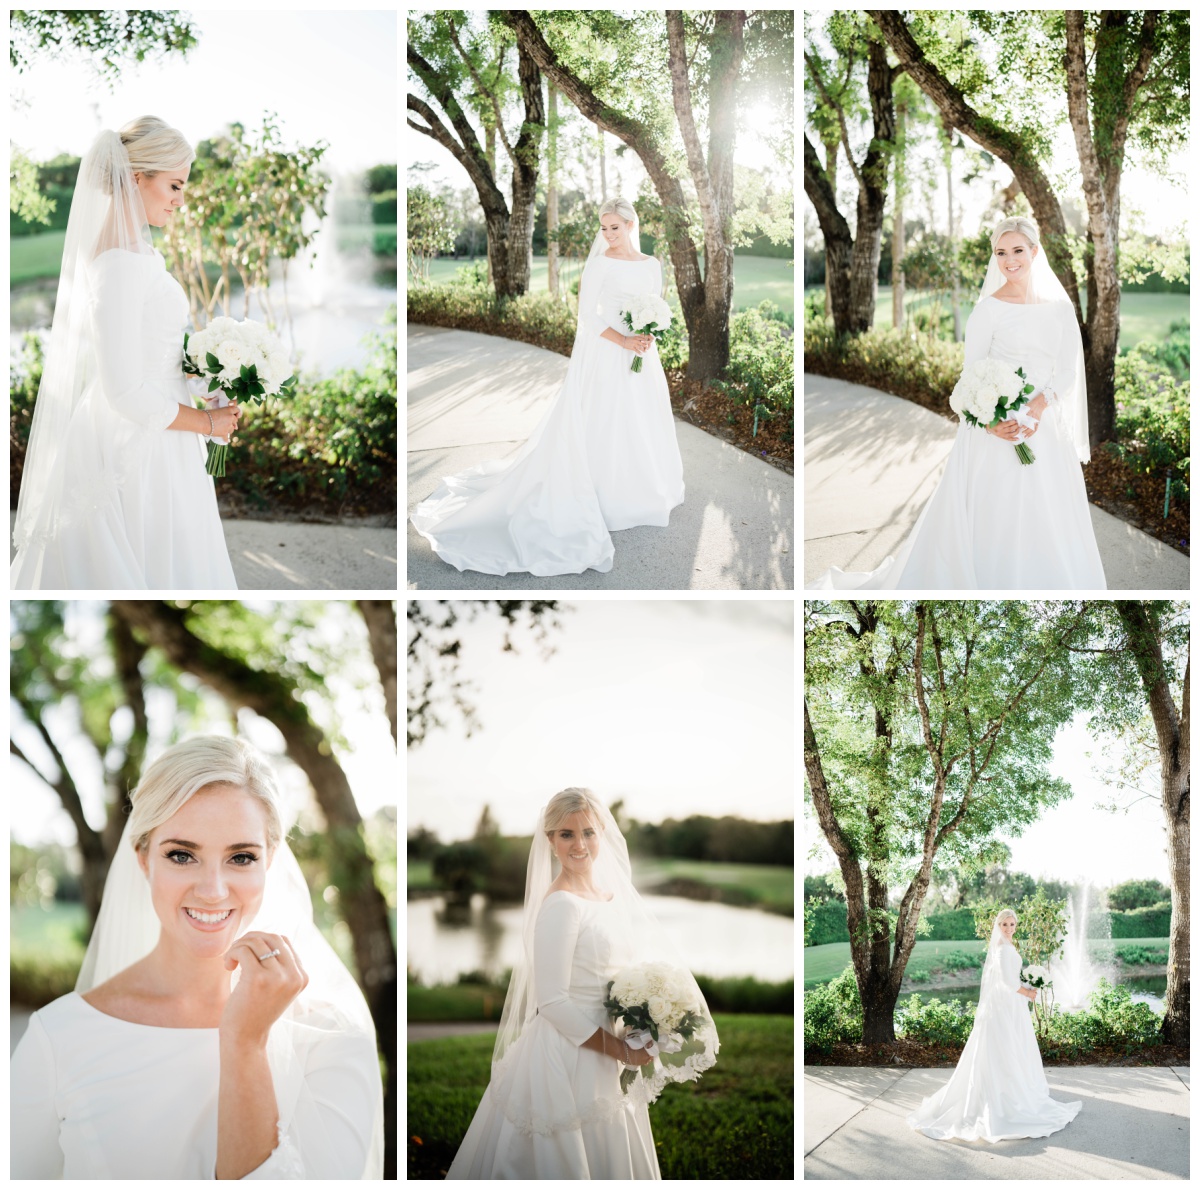 Naples bride smiles at country club wedding with quart length sleeved wedding gown, classic low bun and vintage bridal veil